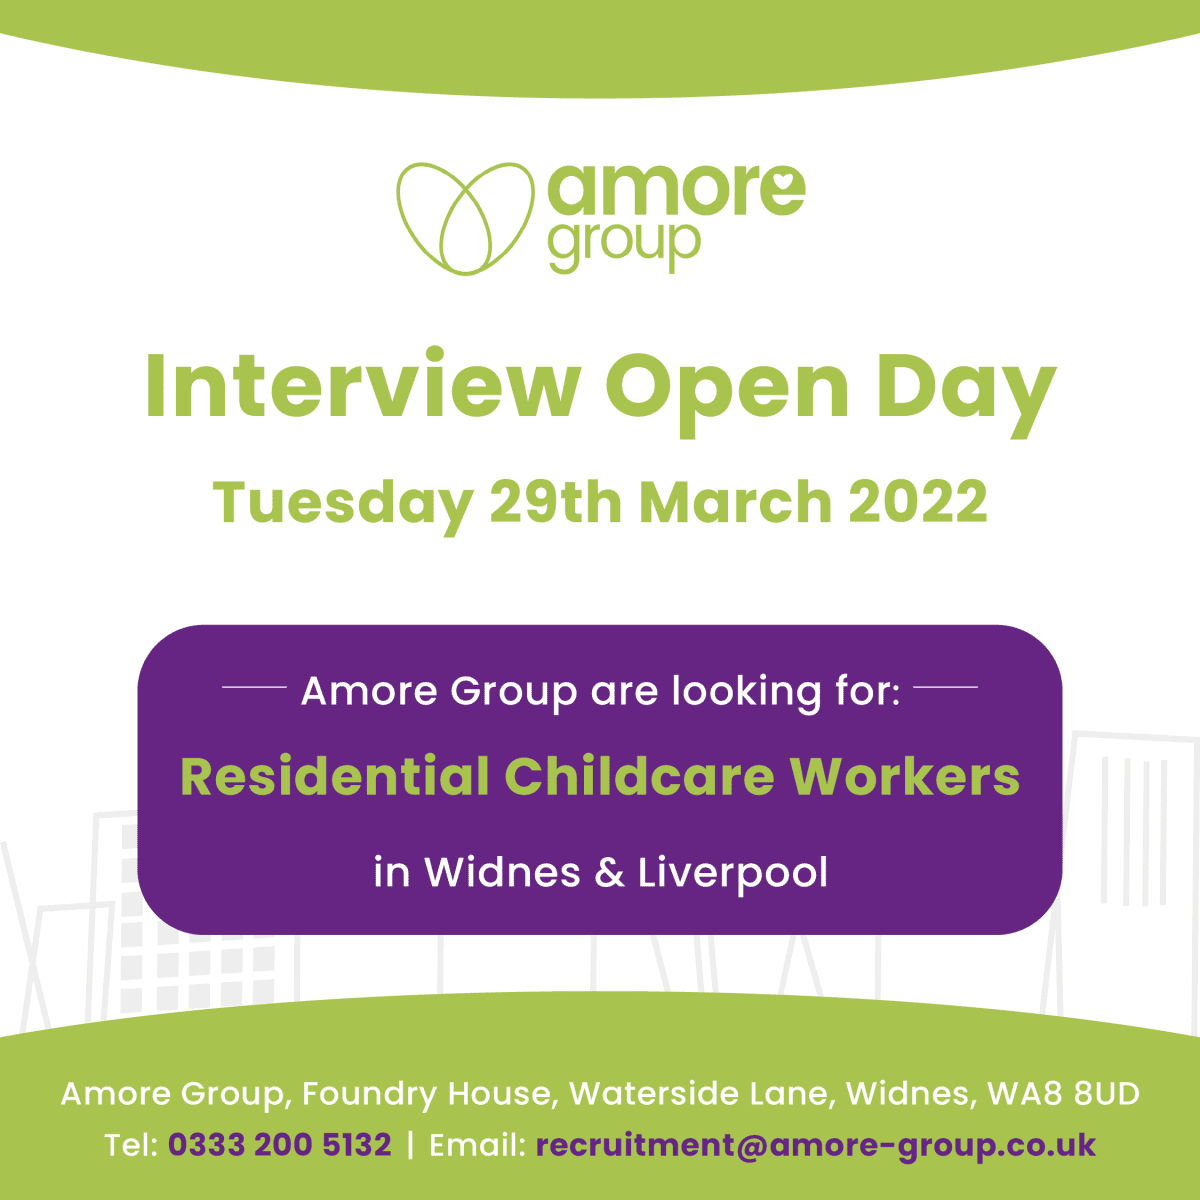 Join us at our Interview Open Day!